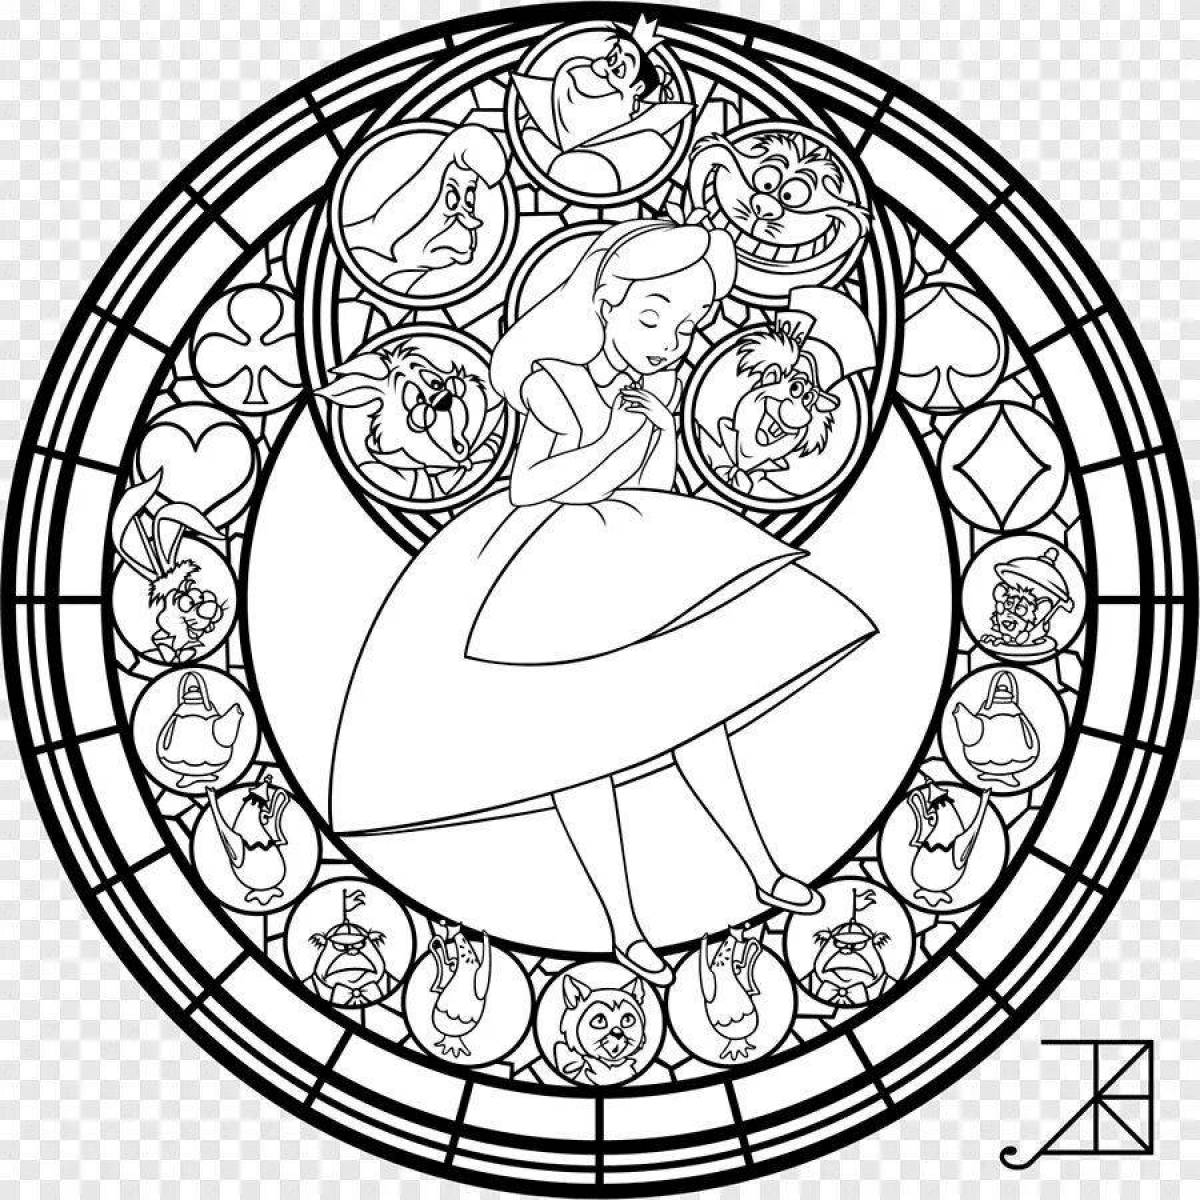 Brightly colored stained glass windows coloring book